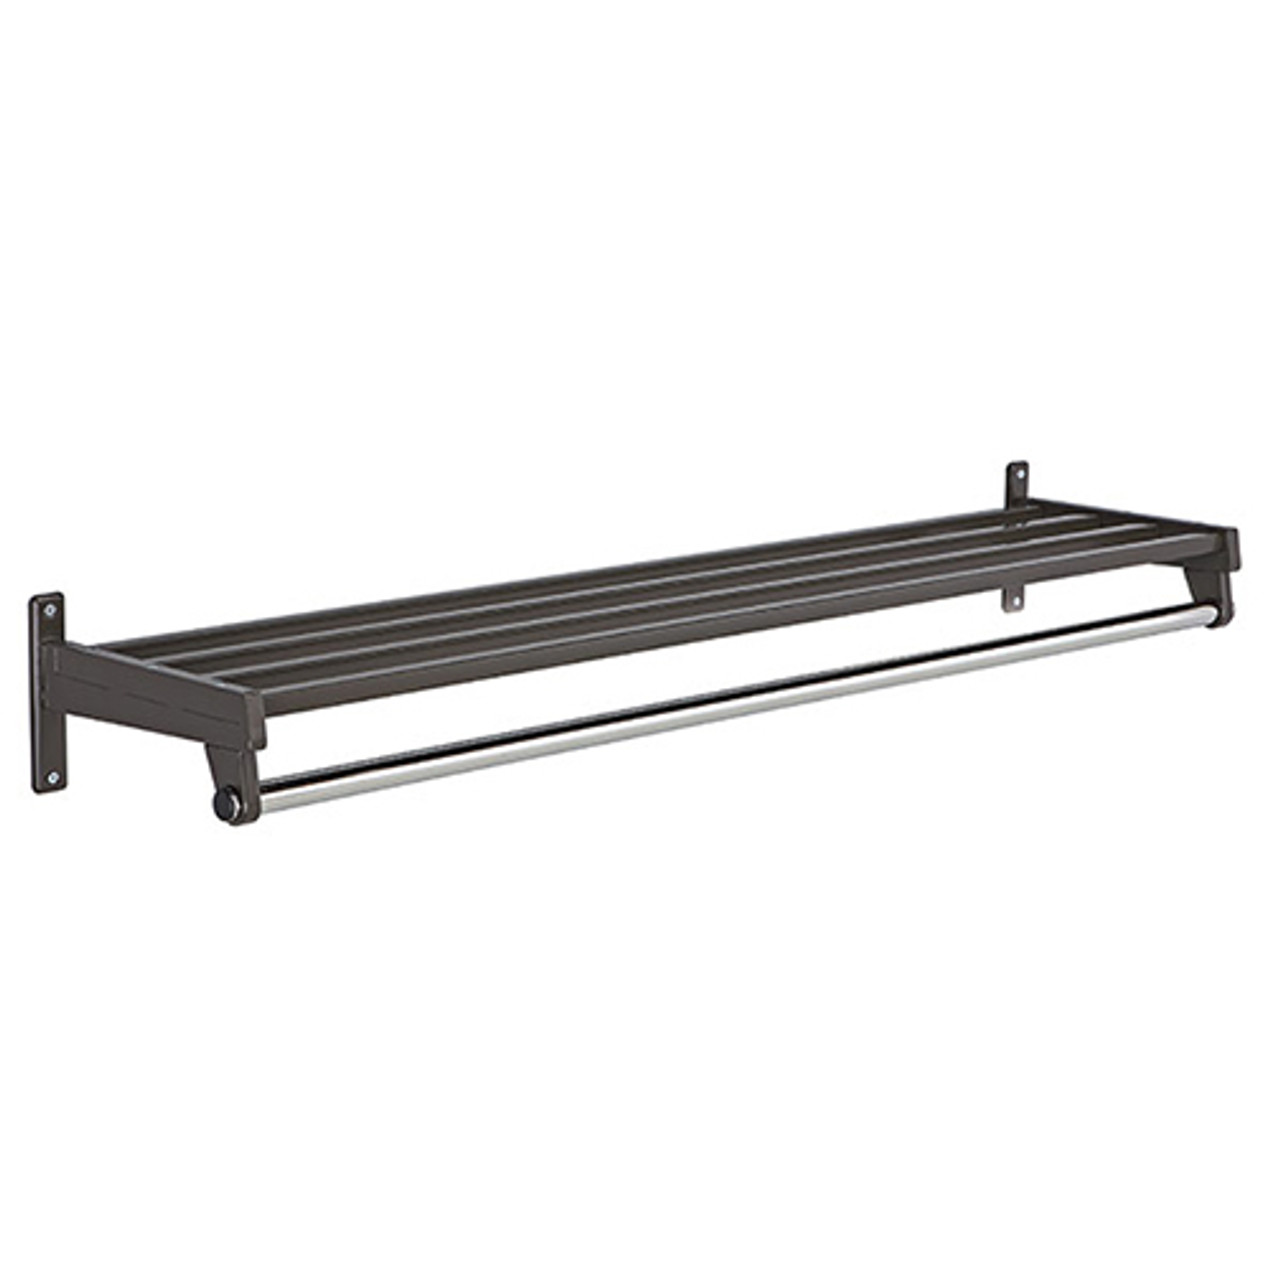 Magnuson 24 Wall Mounted Steel Coat Rack with Shelf - DS-2H